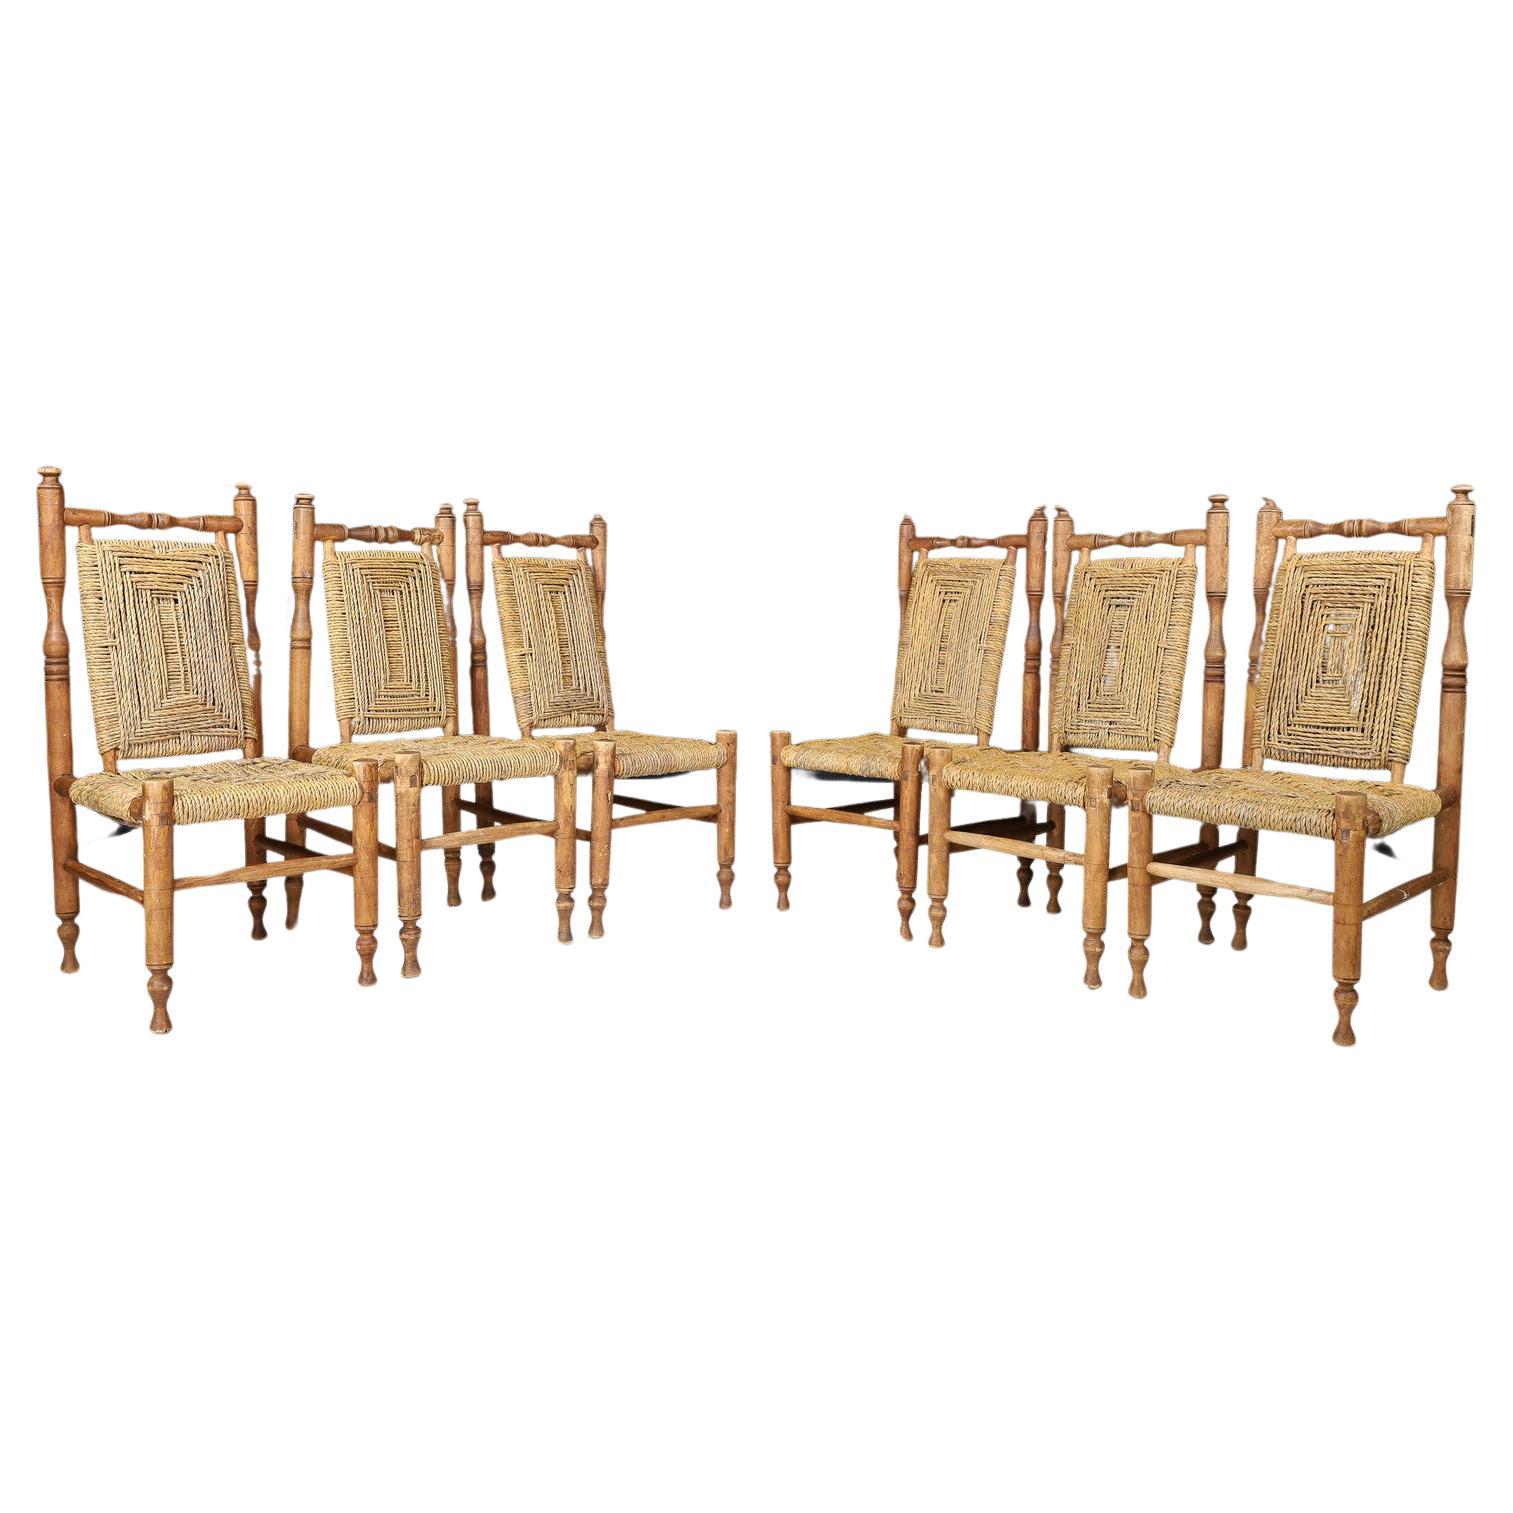 Rope Adrien Audoux and Frida Minet, Set of 8 Mid Century Dining Chairs, circa 1950s